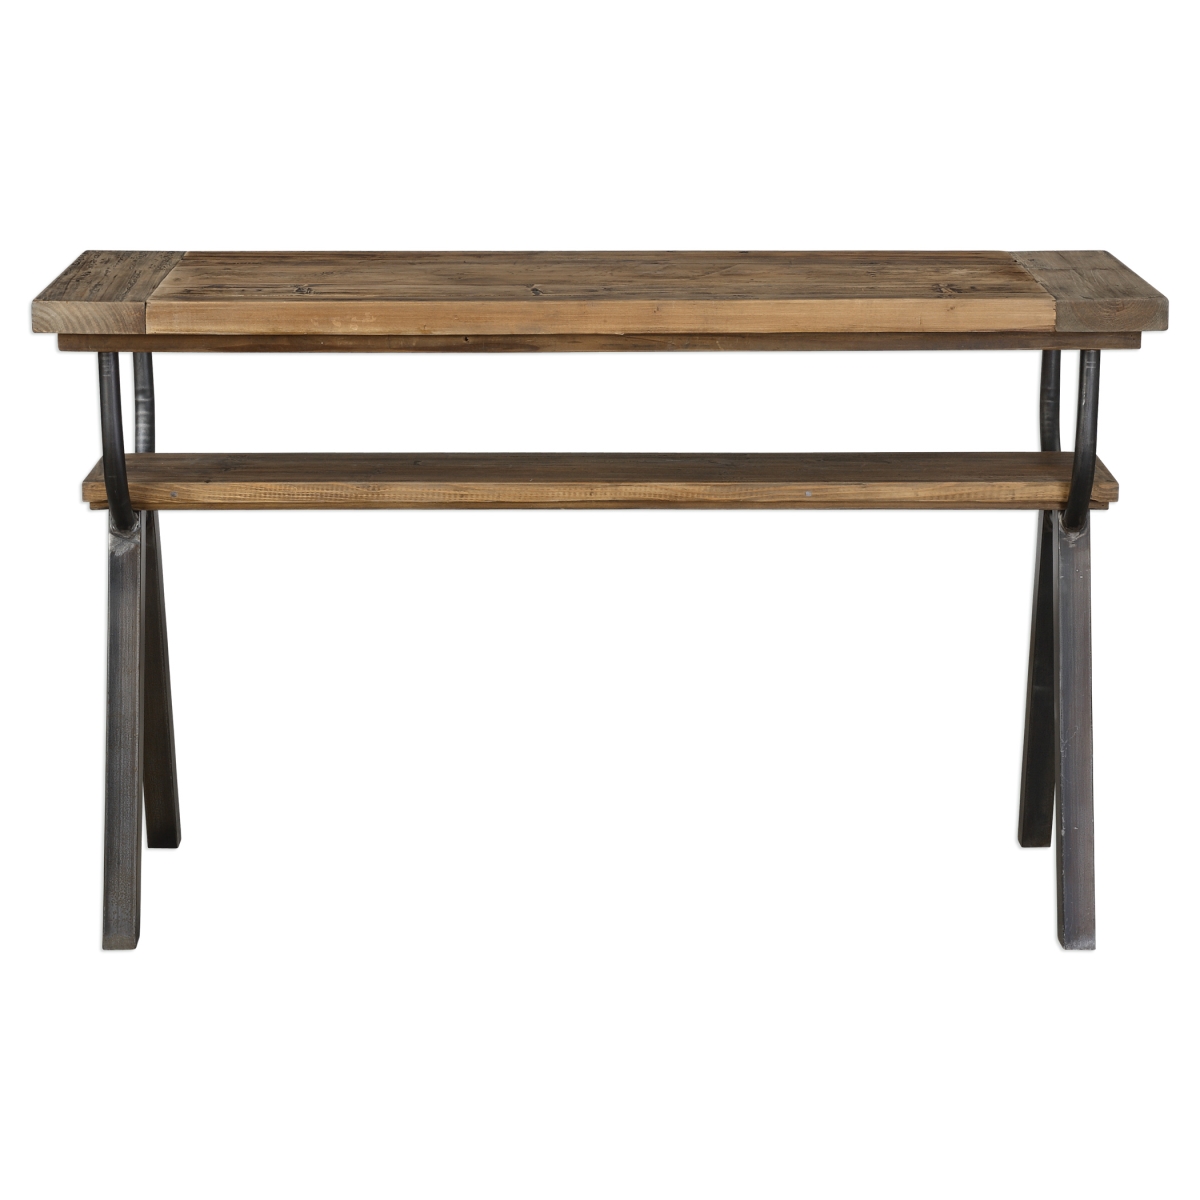 Picture of 212 Main 24775 Domini Industrial Console Table